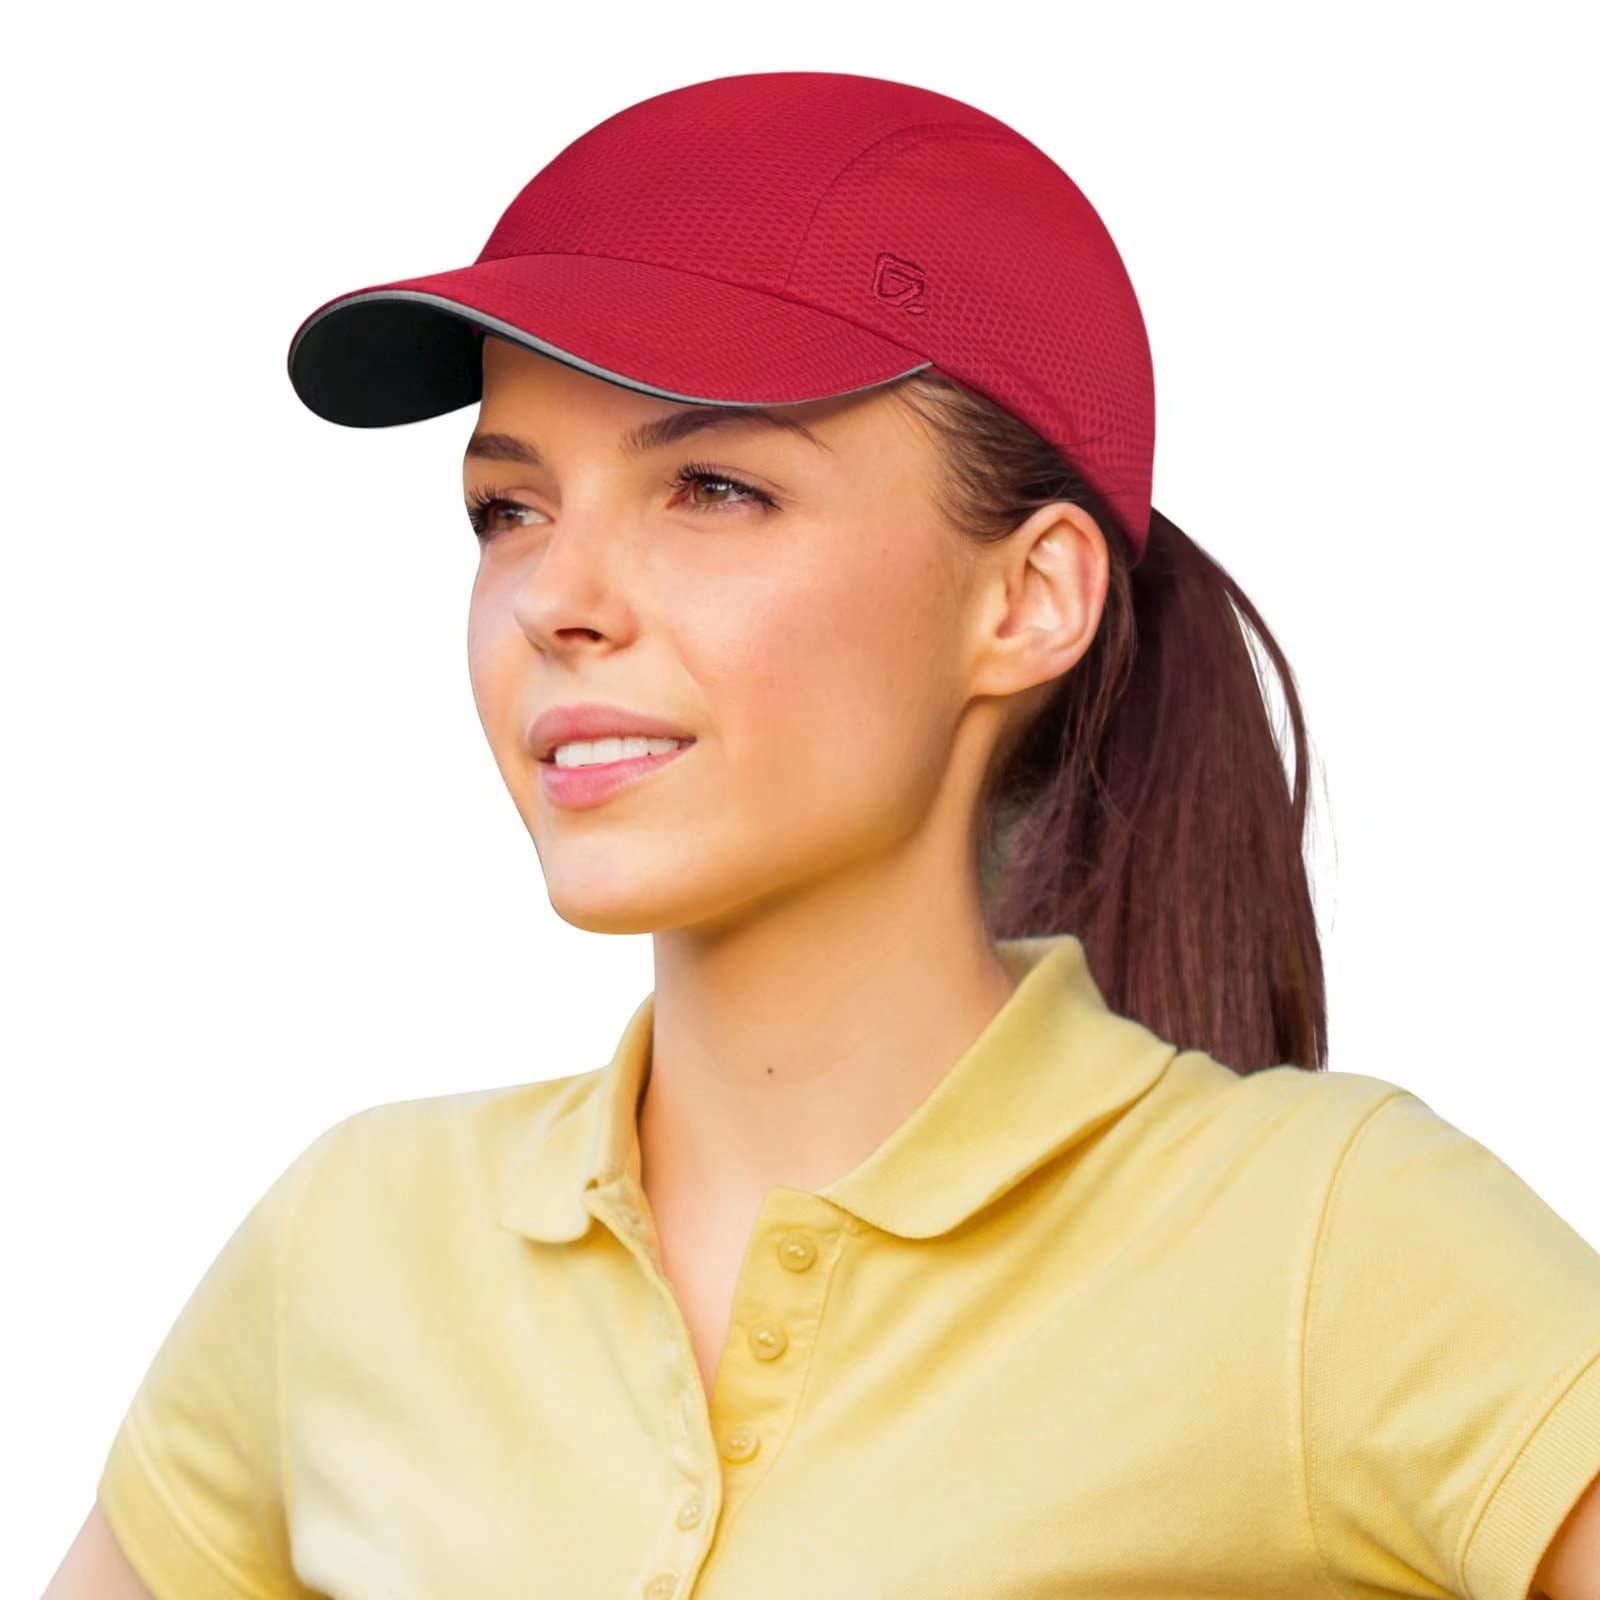 GADIEMKENSD Women's Race Day Running Hat Performance Mesh Baseball Cap -  Excellent Ventilation, Lightweight, Reflective Safety Ponytail Hats for  Exercise Golf Hiking Beach Workout Gym Red 